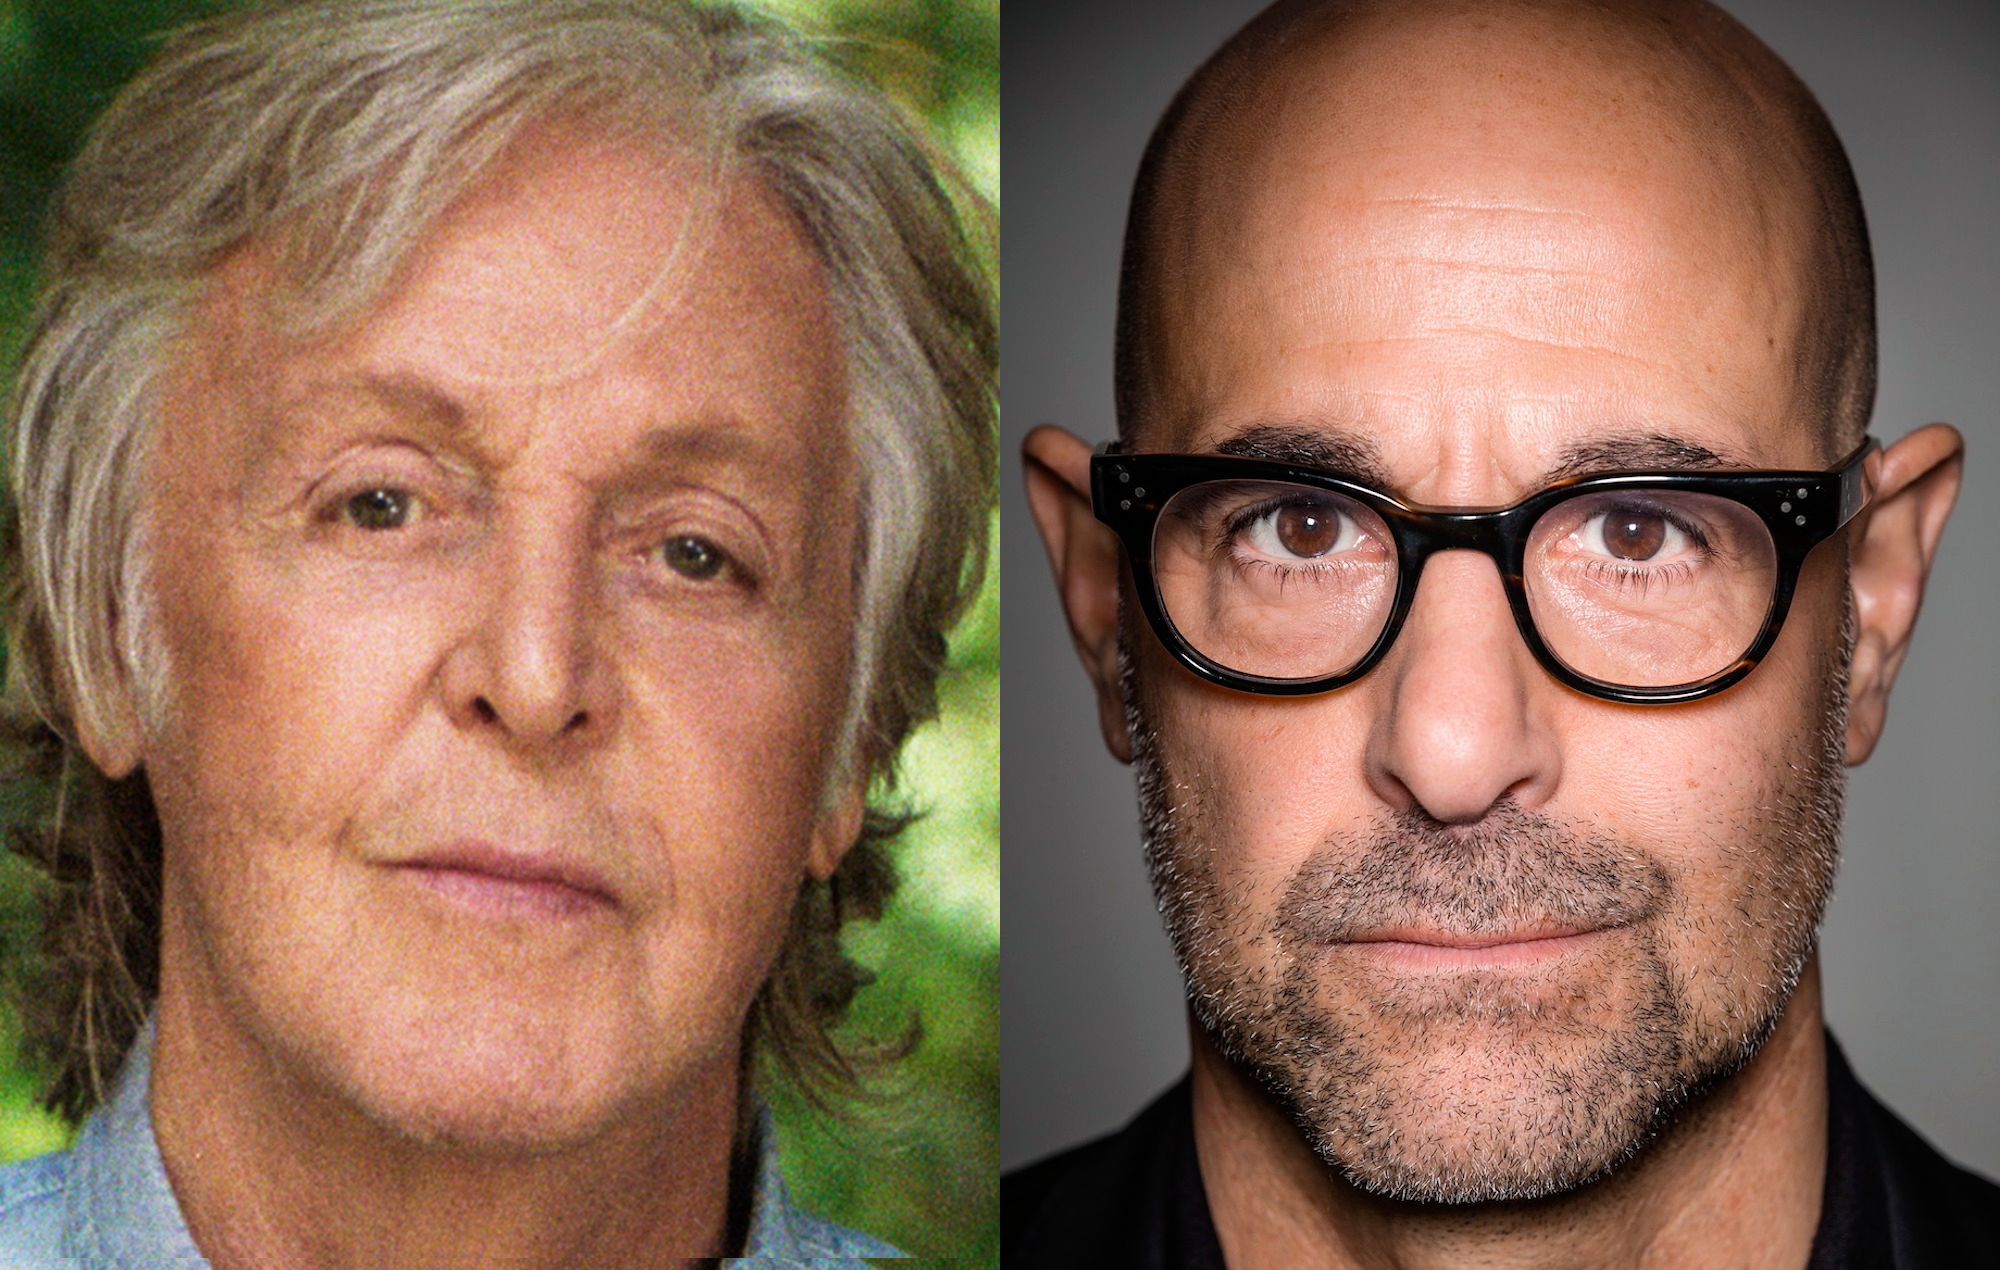 Stanley Tucci to interview Paul McCartney to launch new London Beatles exhibition